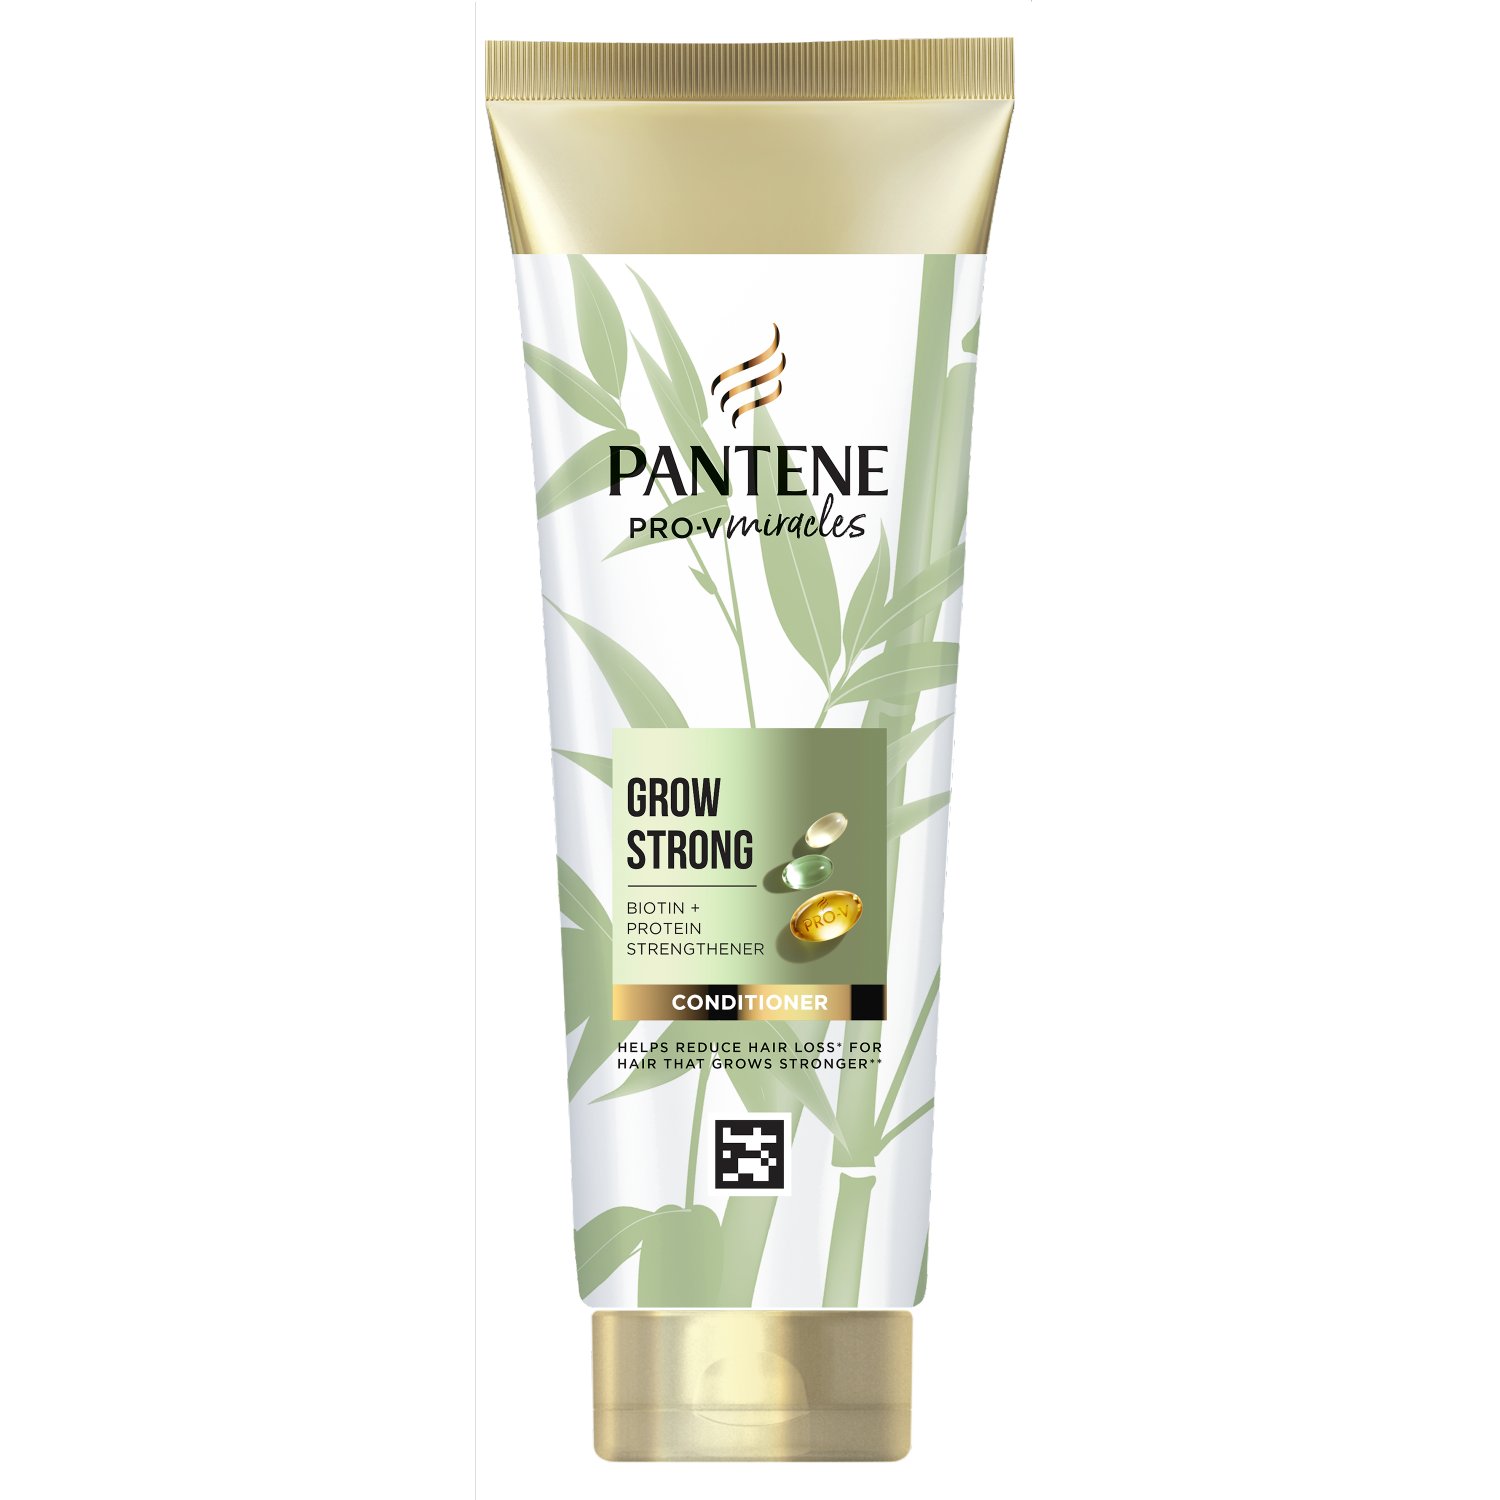 Pantene Pro-v Miracles Grow Strong Conditioner (275 ml)